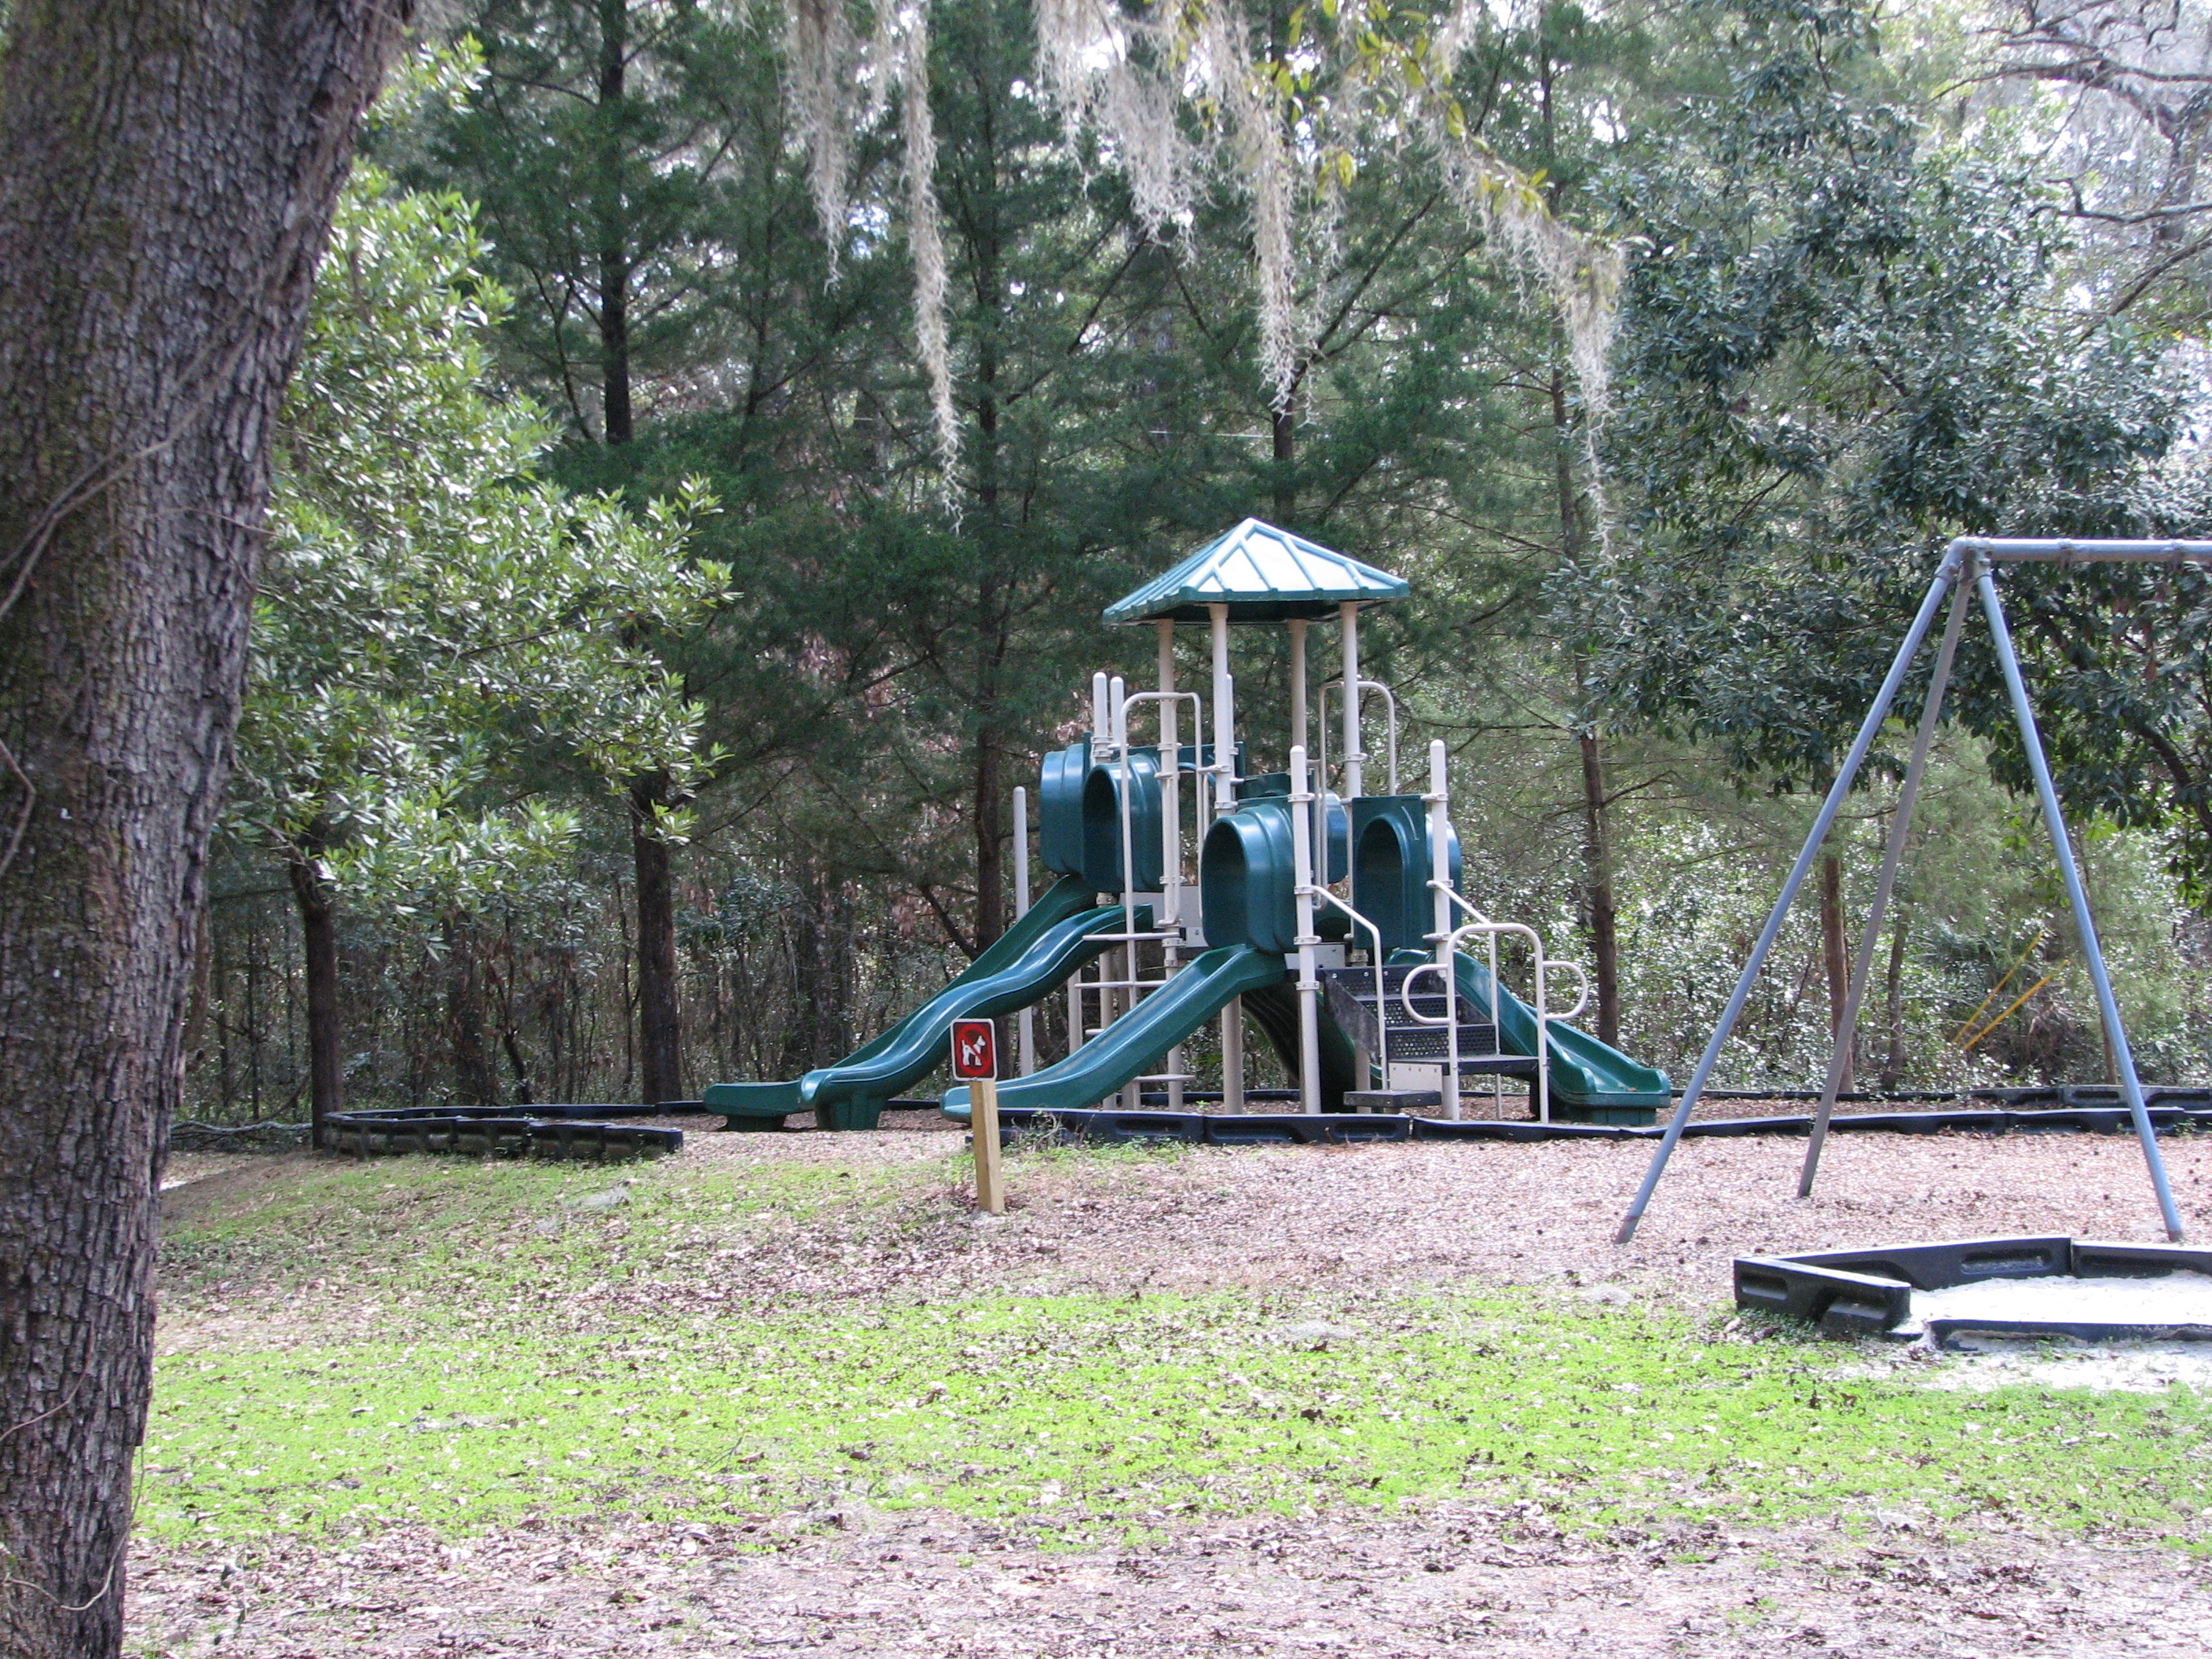 The playground is just one of the many activities at Fanning Springs Park.